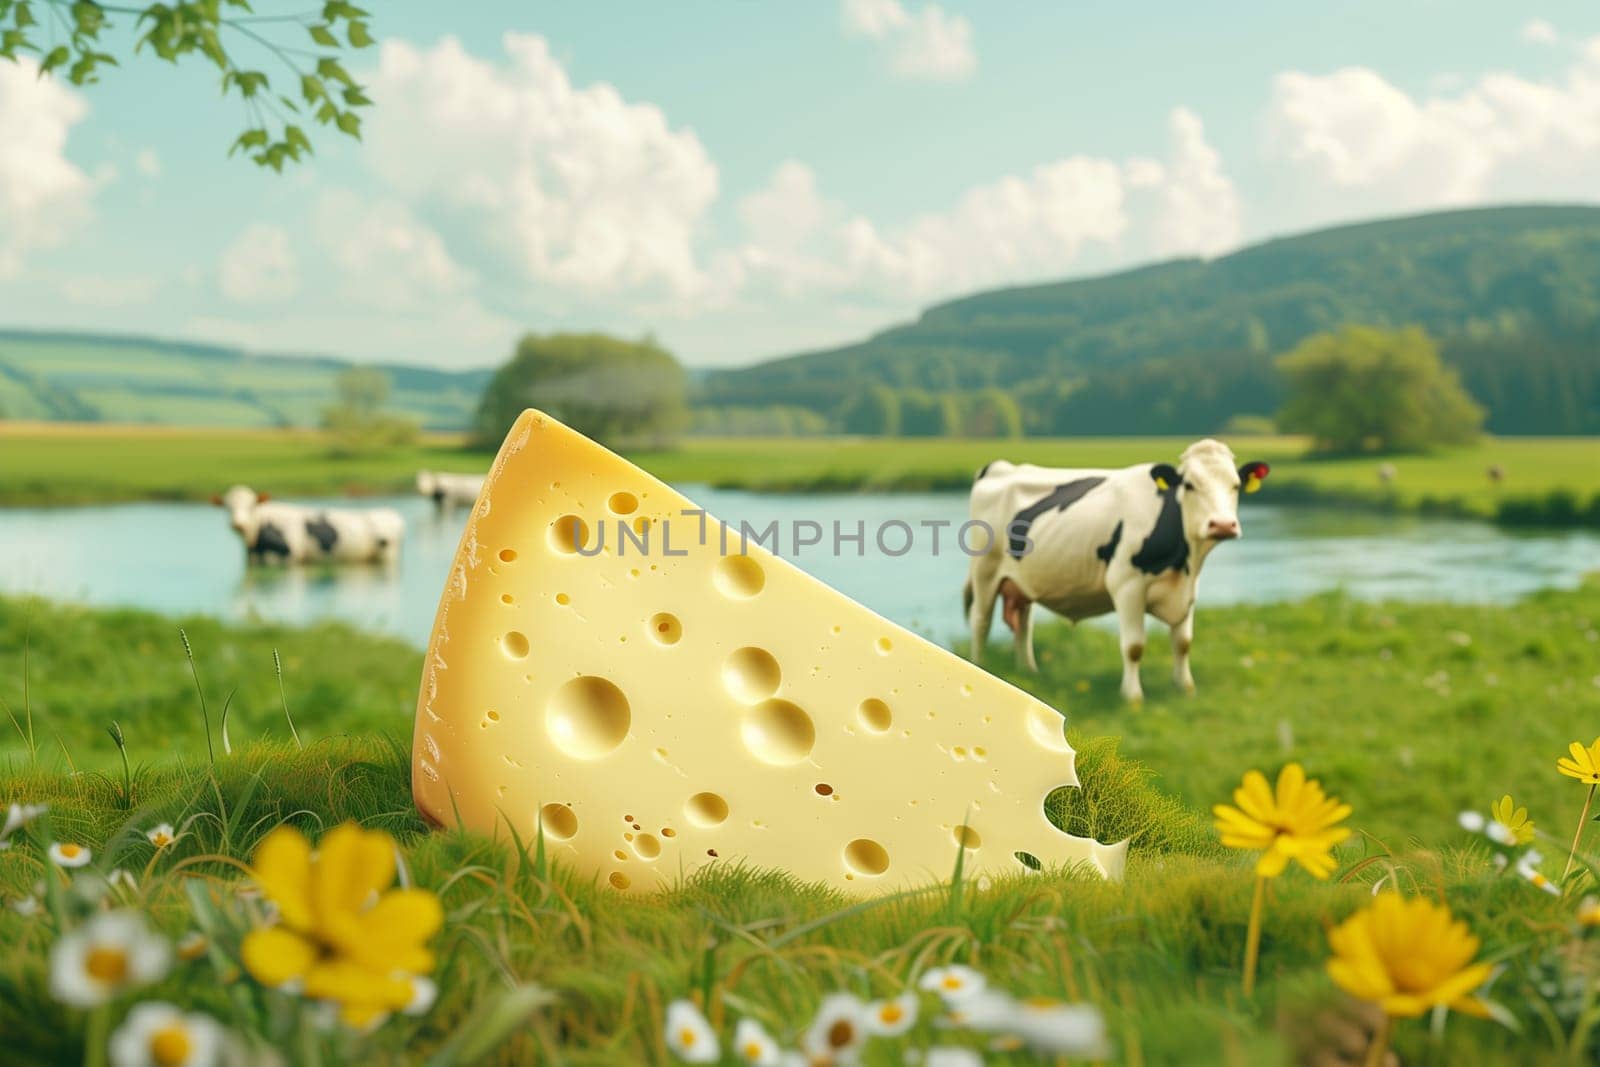 A piece of cheese lies on a bright green field, with cows grazing nearby.